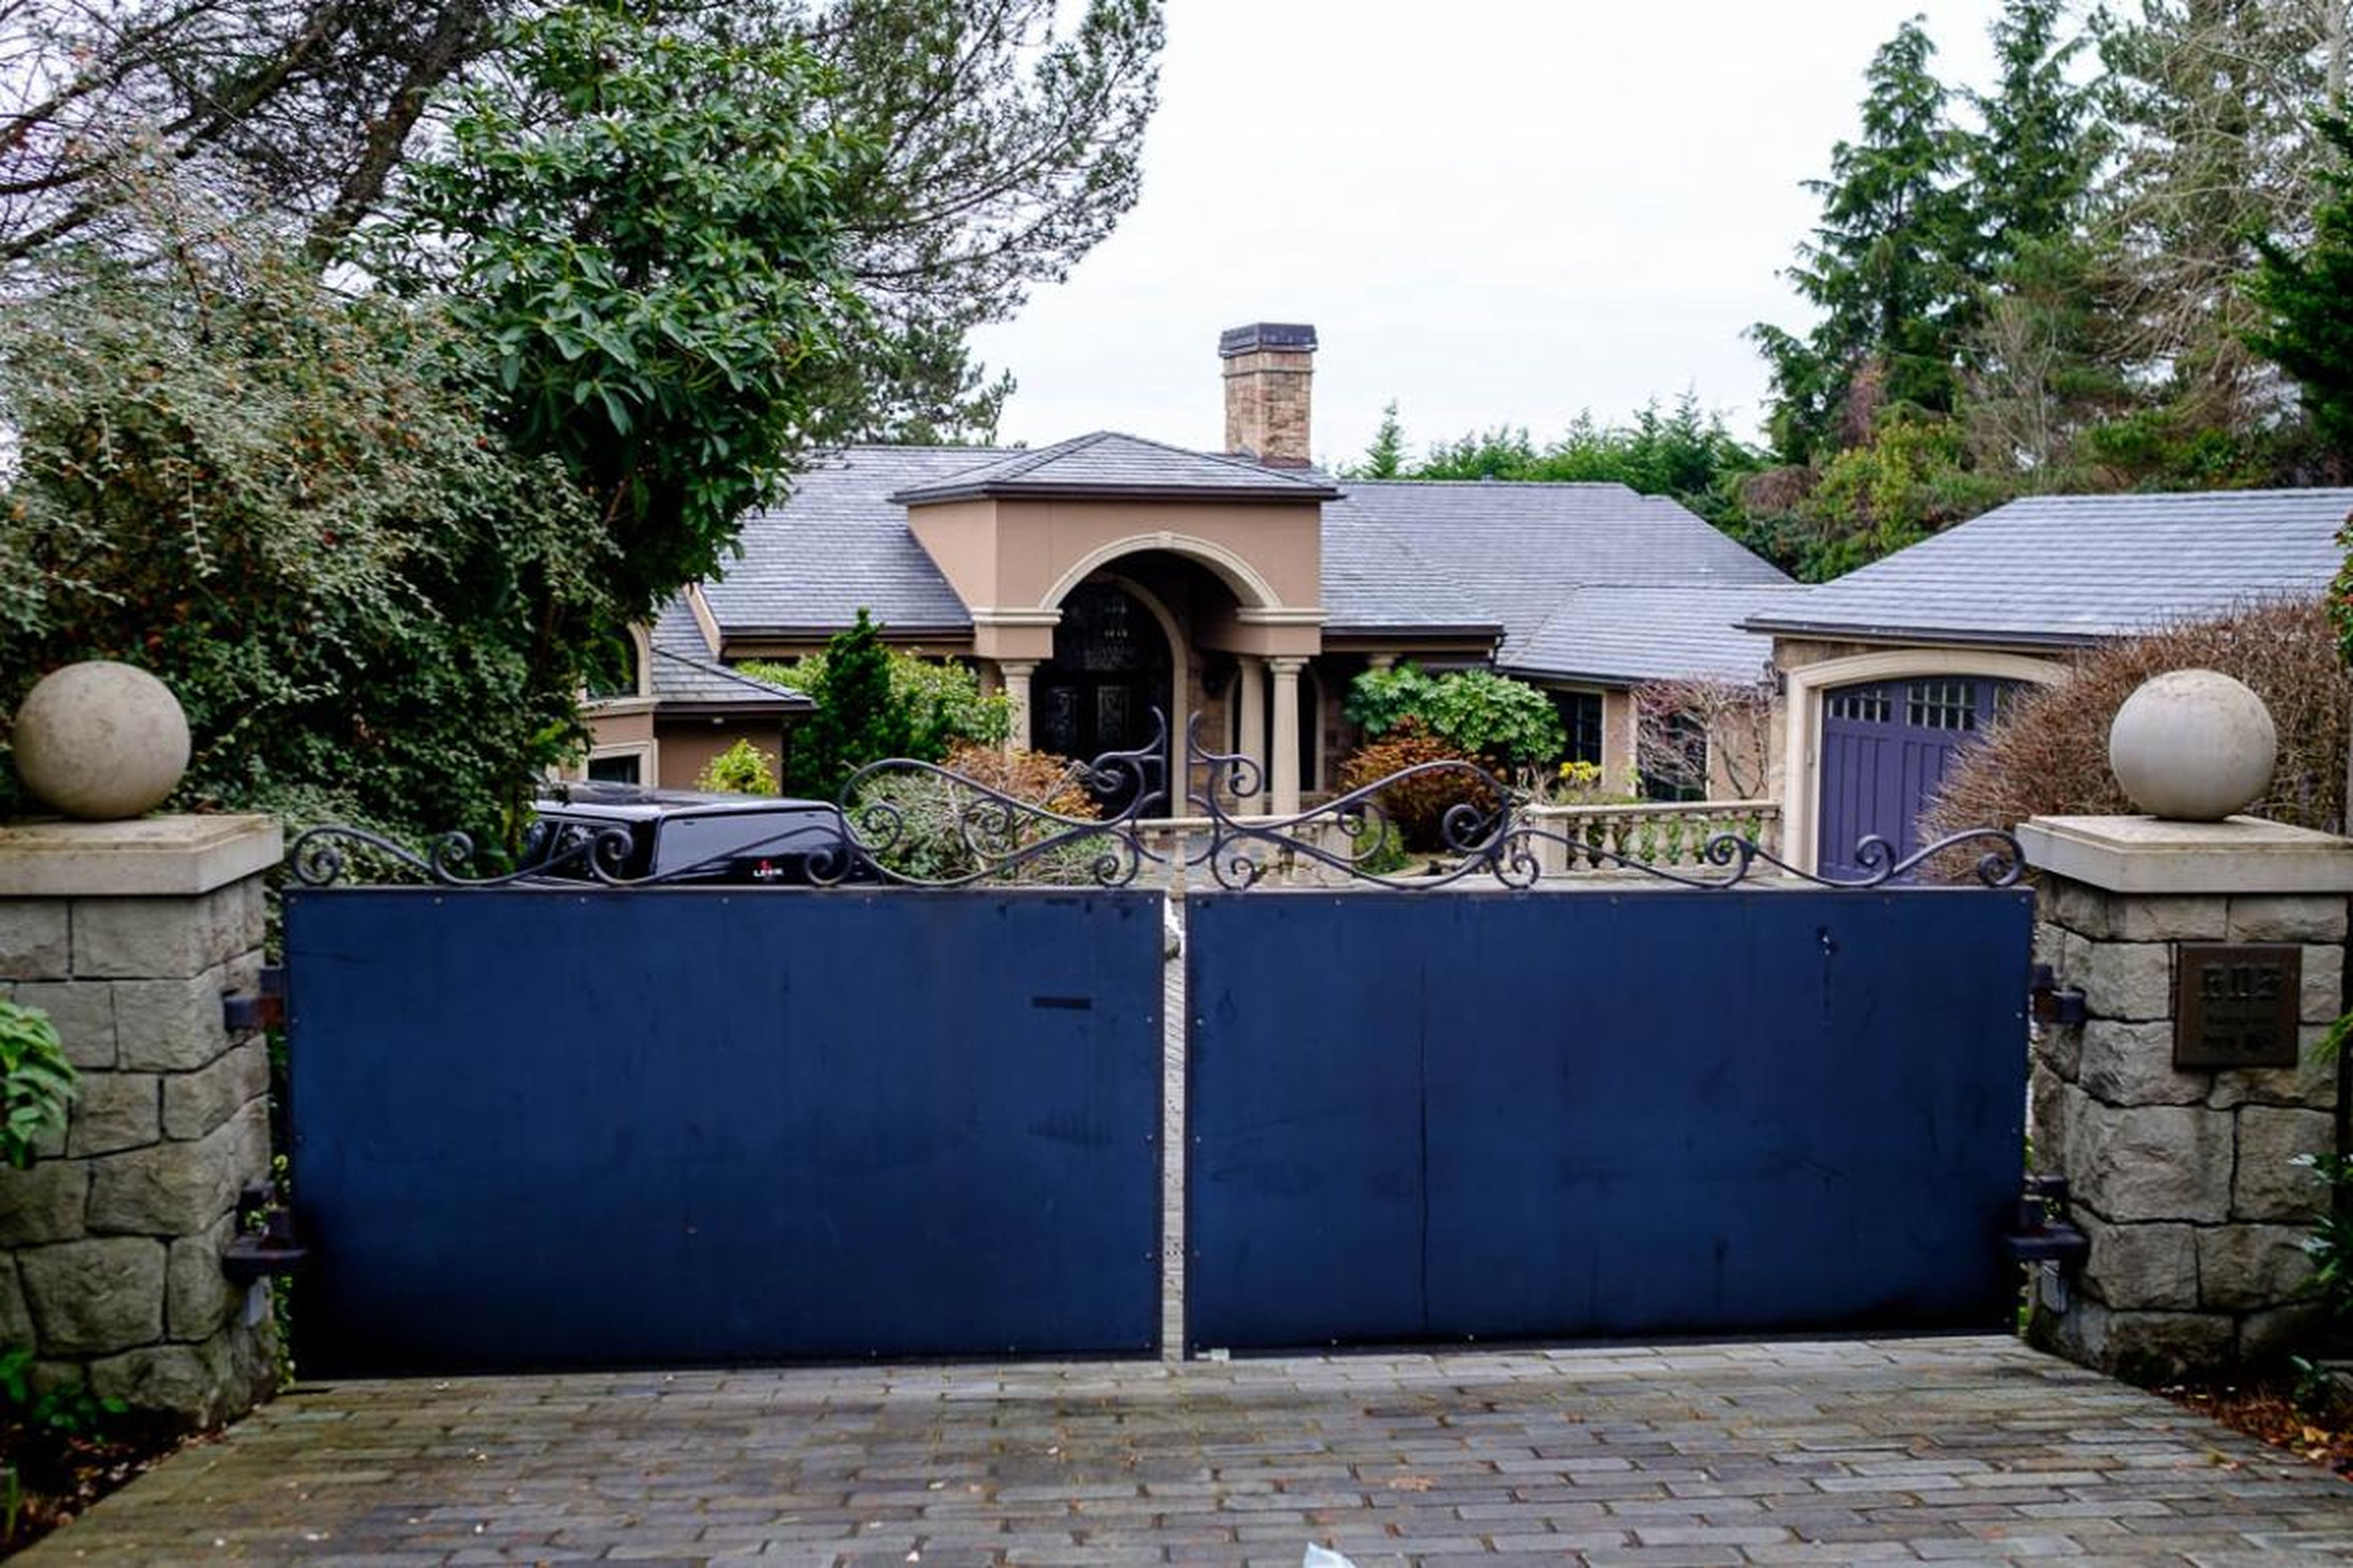 The houses on the waterfront side of Evergreen Point Road were all blocked by high gates. The mansions looked massive, but it was hard to see inside.